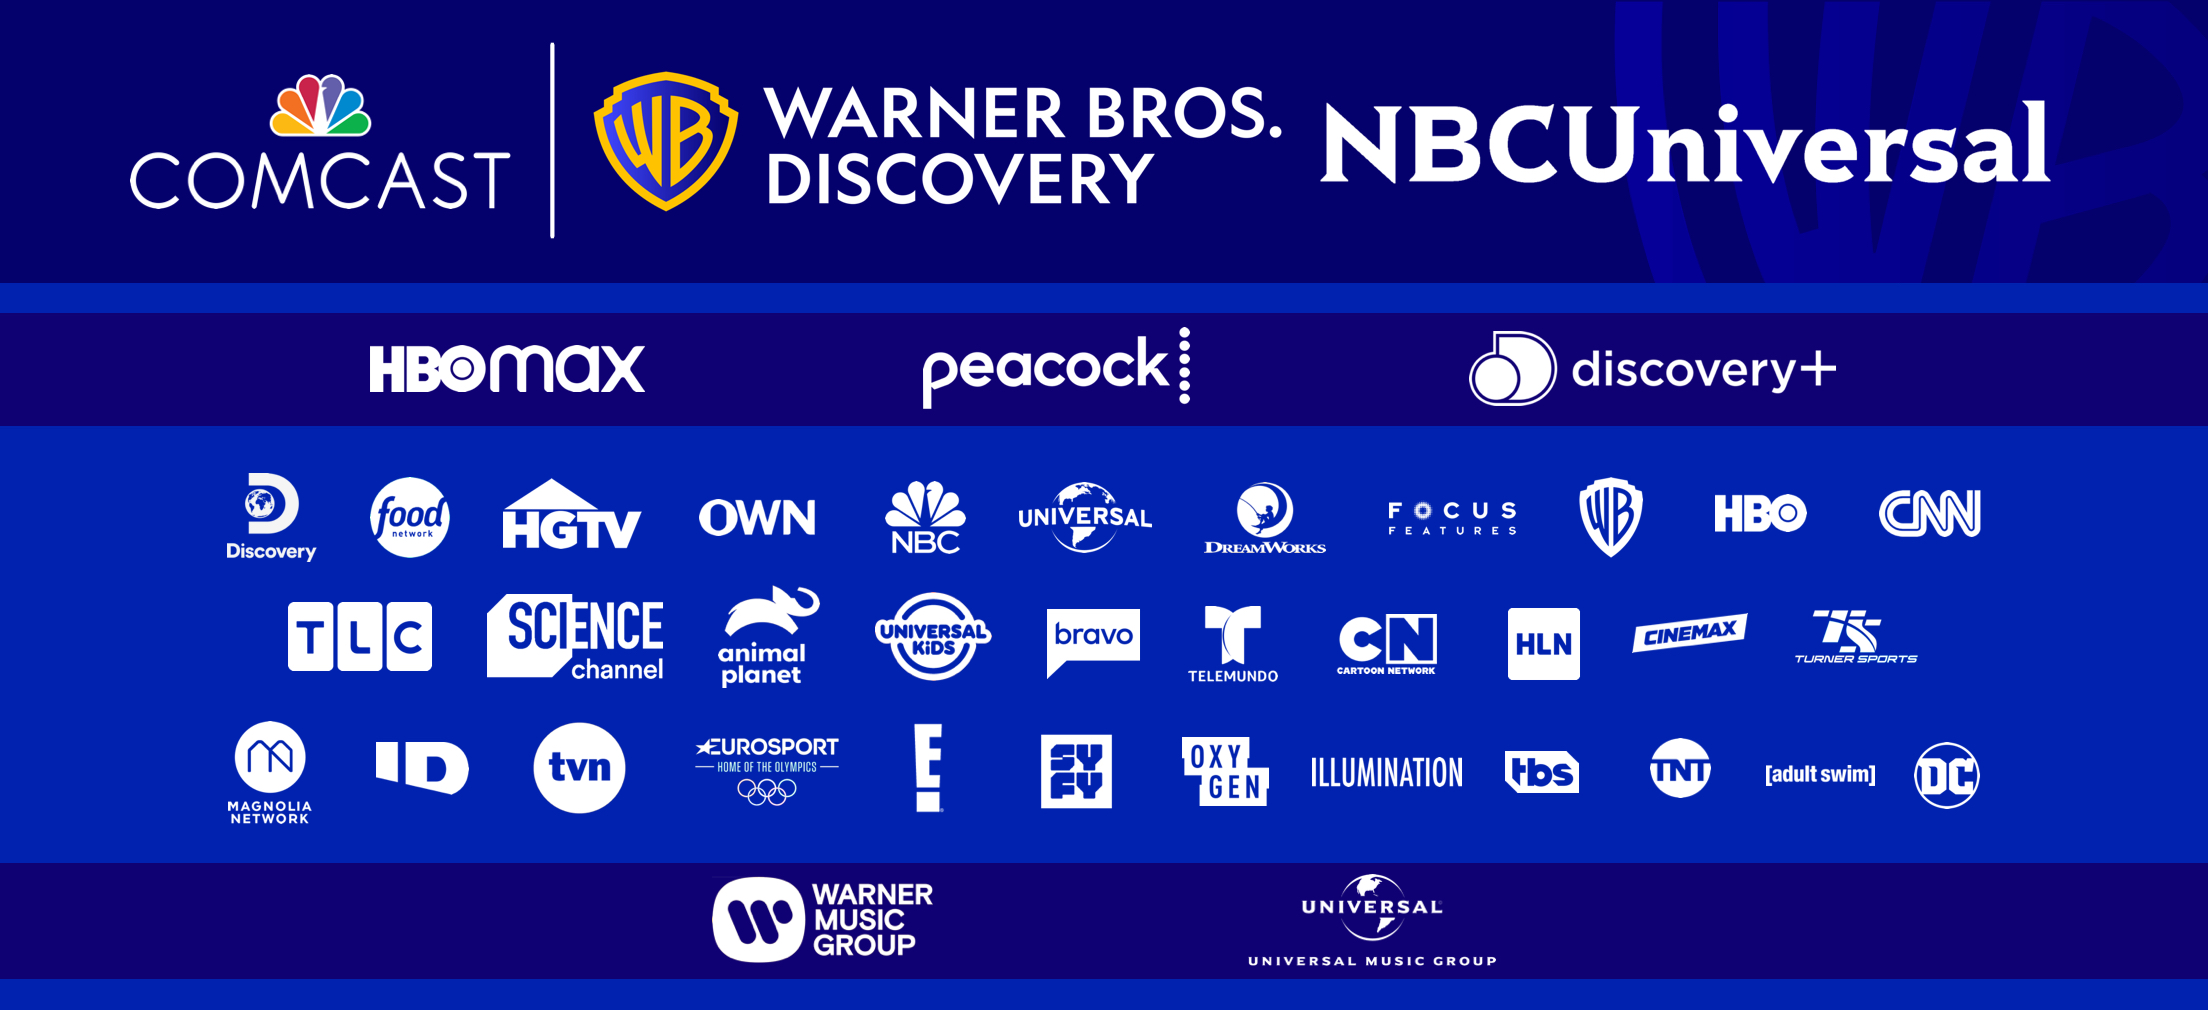 Warner Bros. Discovery and NBCUniversal merger by VictorPinas on